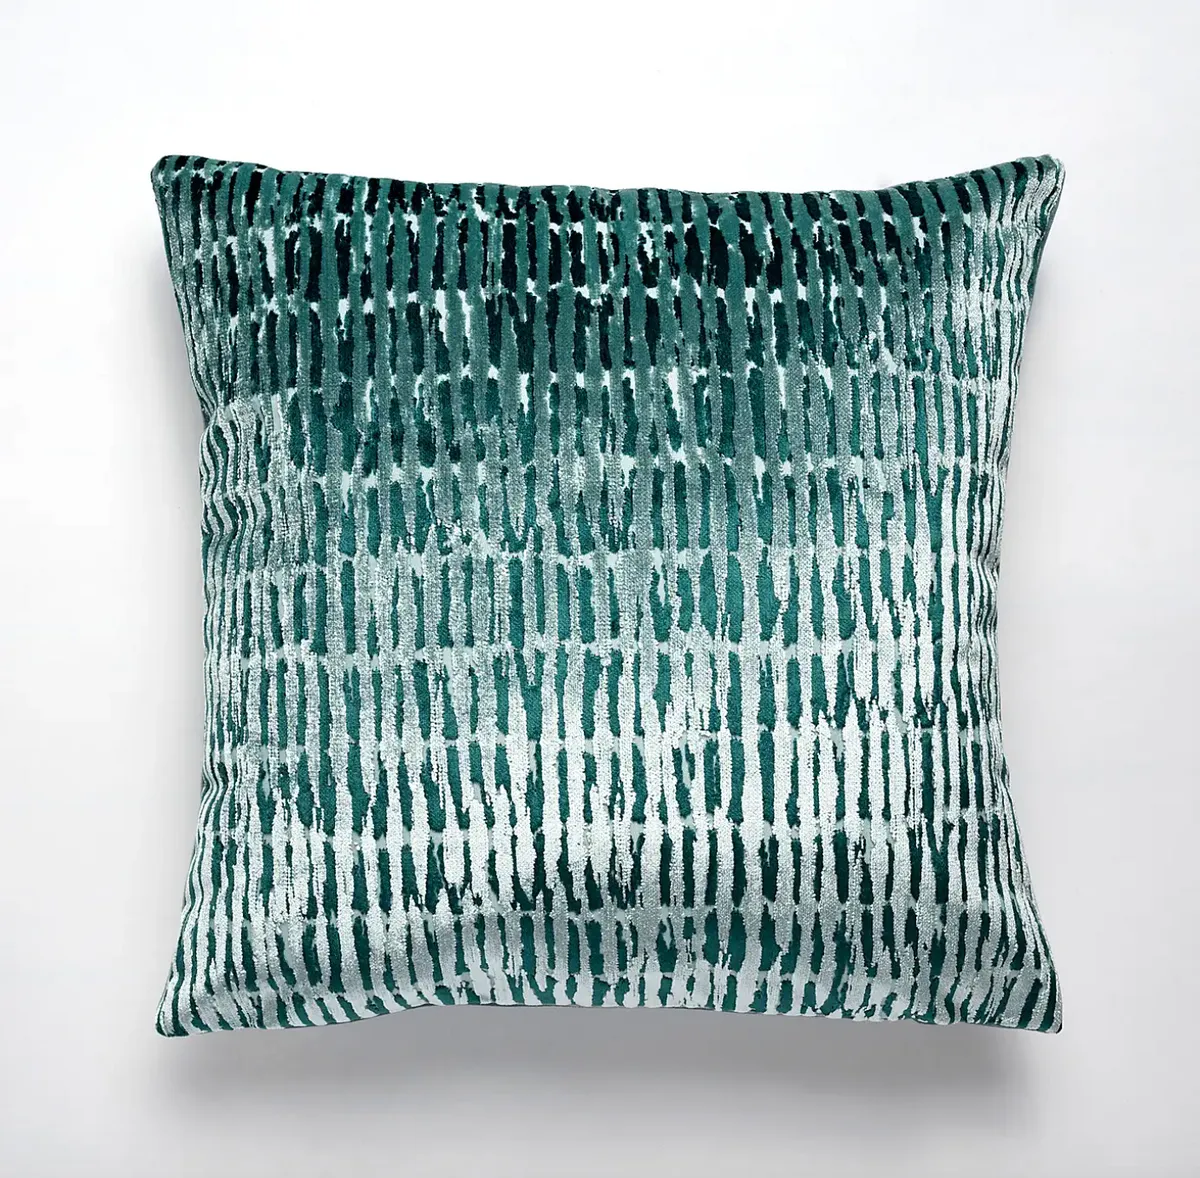 Teal and silver cushions